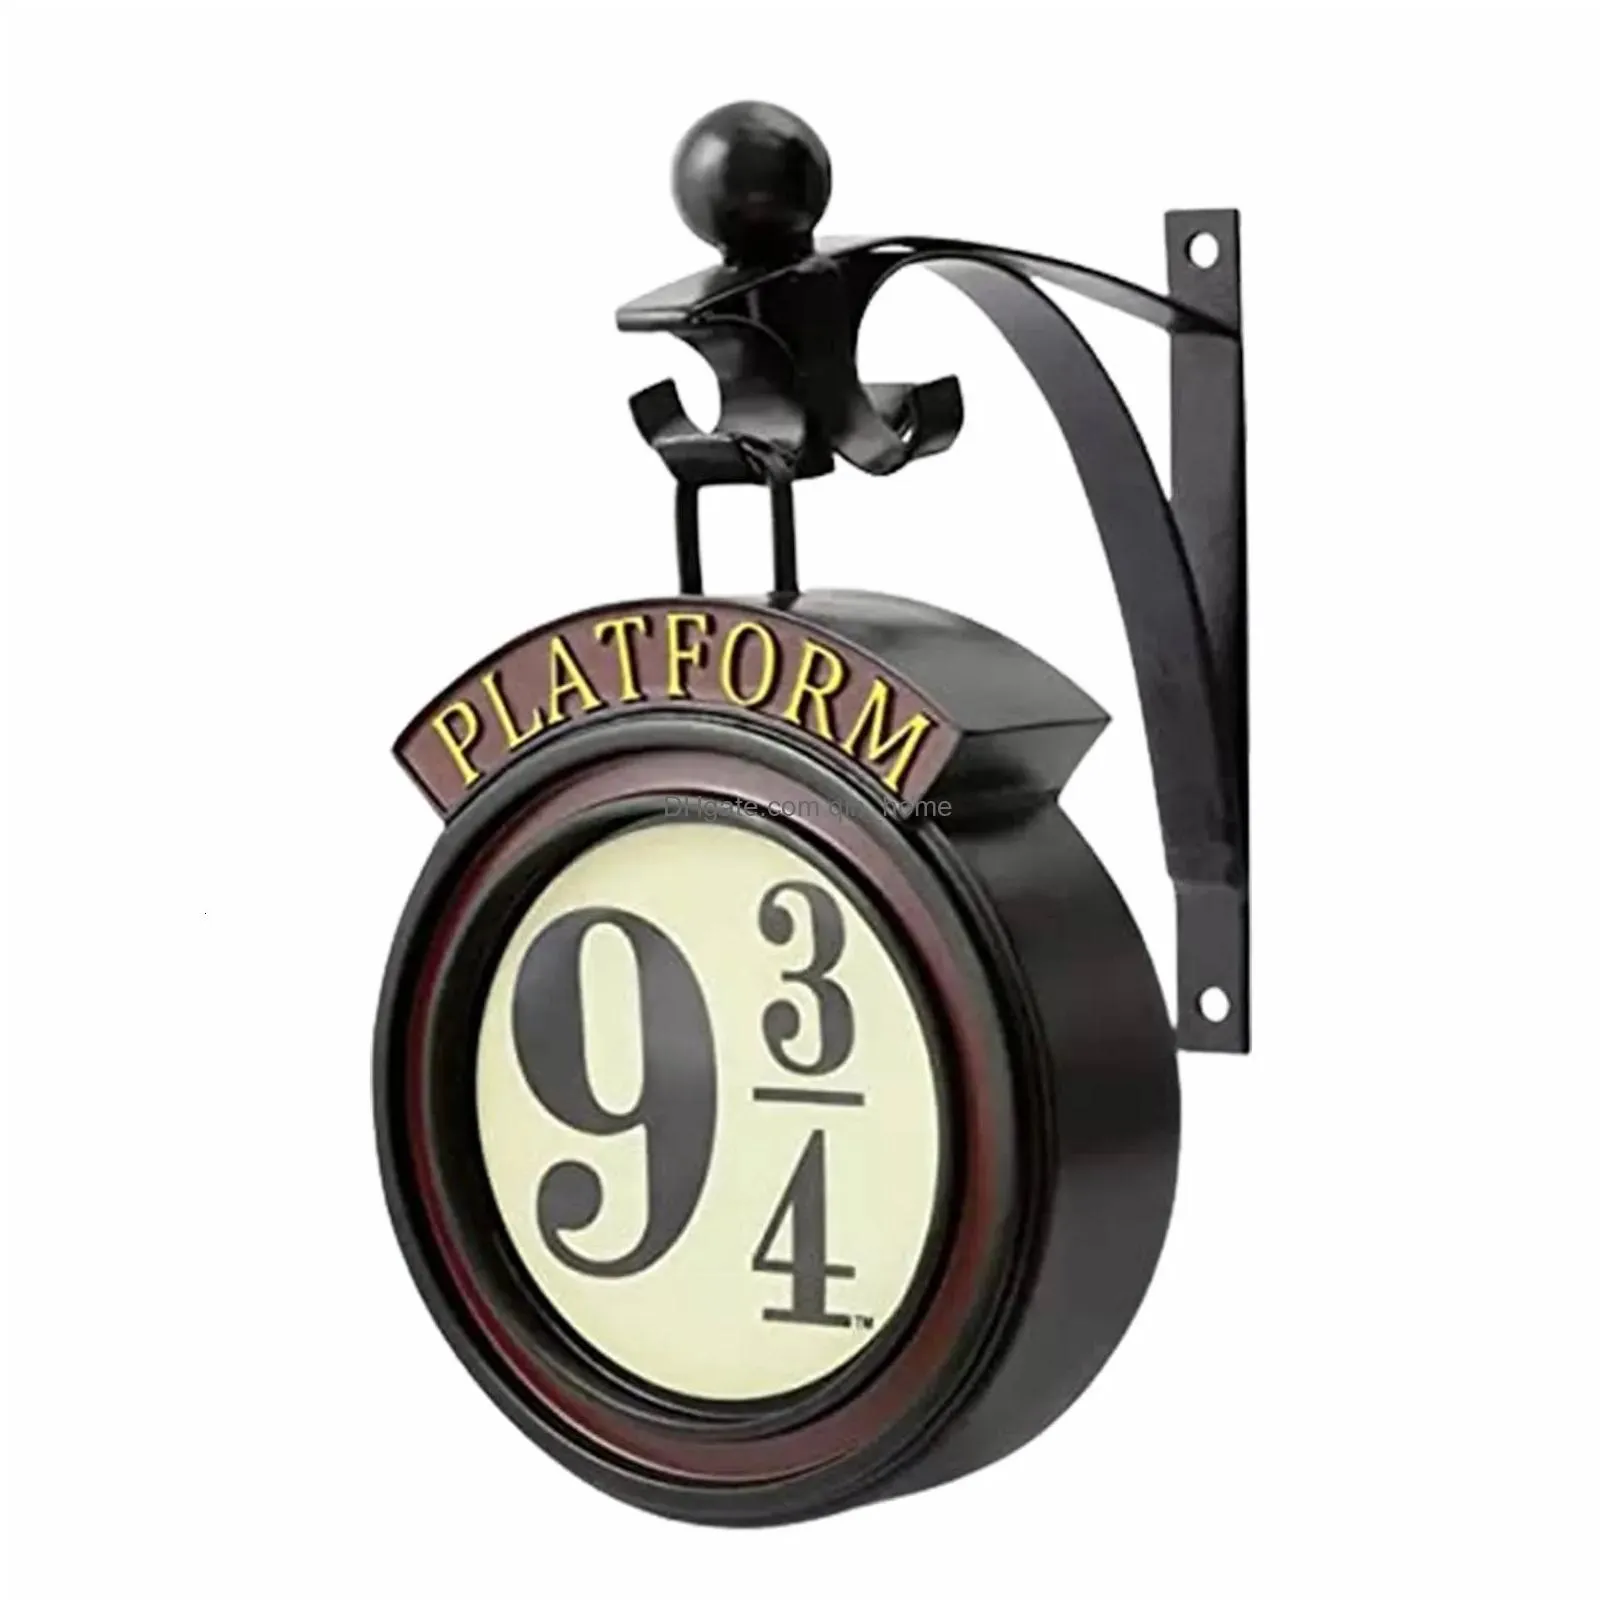 decorative objects figurines led hangings wall lamps night light platform 9 3/4 3d lamp home room decor kids birthday gift 230217